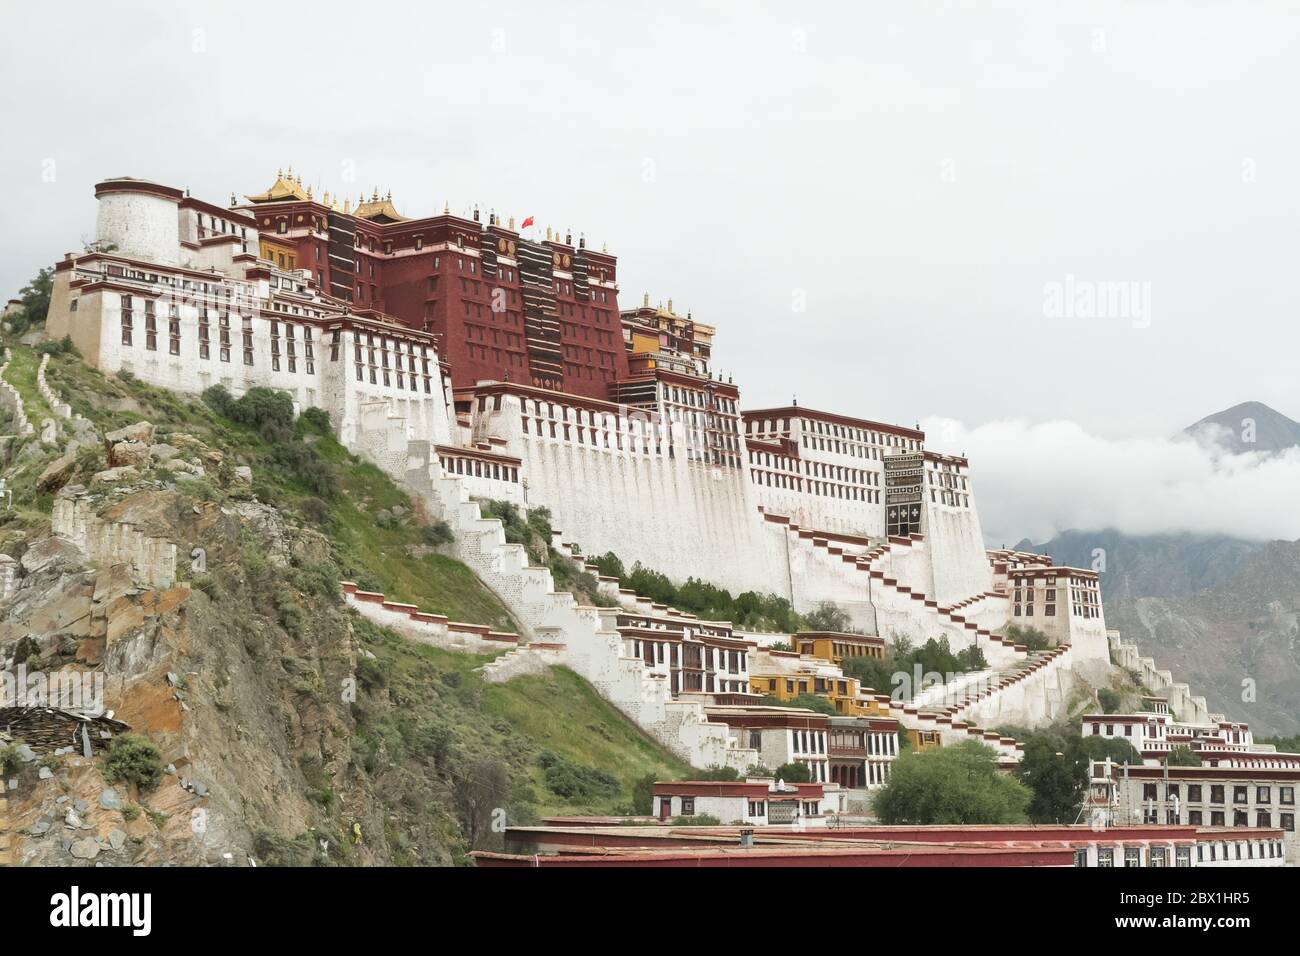 Lhasa, Tibet / China - August 20, 2012: The Potala Monastery in the city of Lhasa in the Tibet Autonomous region of China. The residence of the Dalai Stock Photo